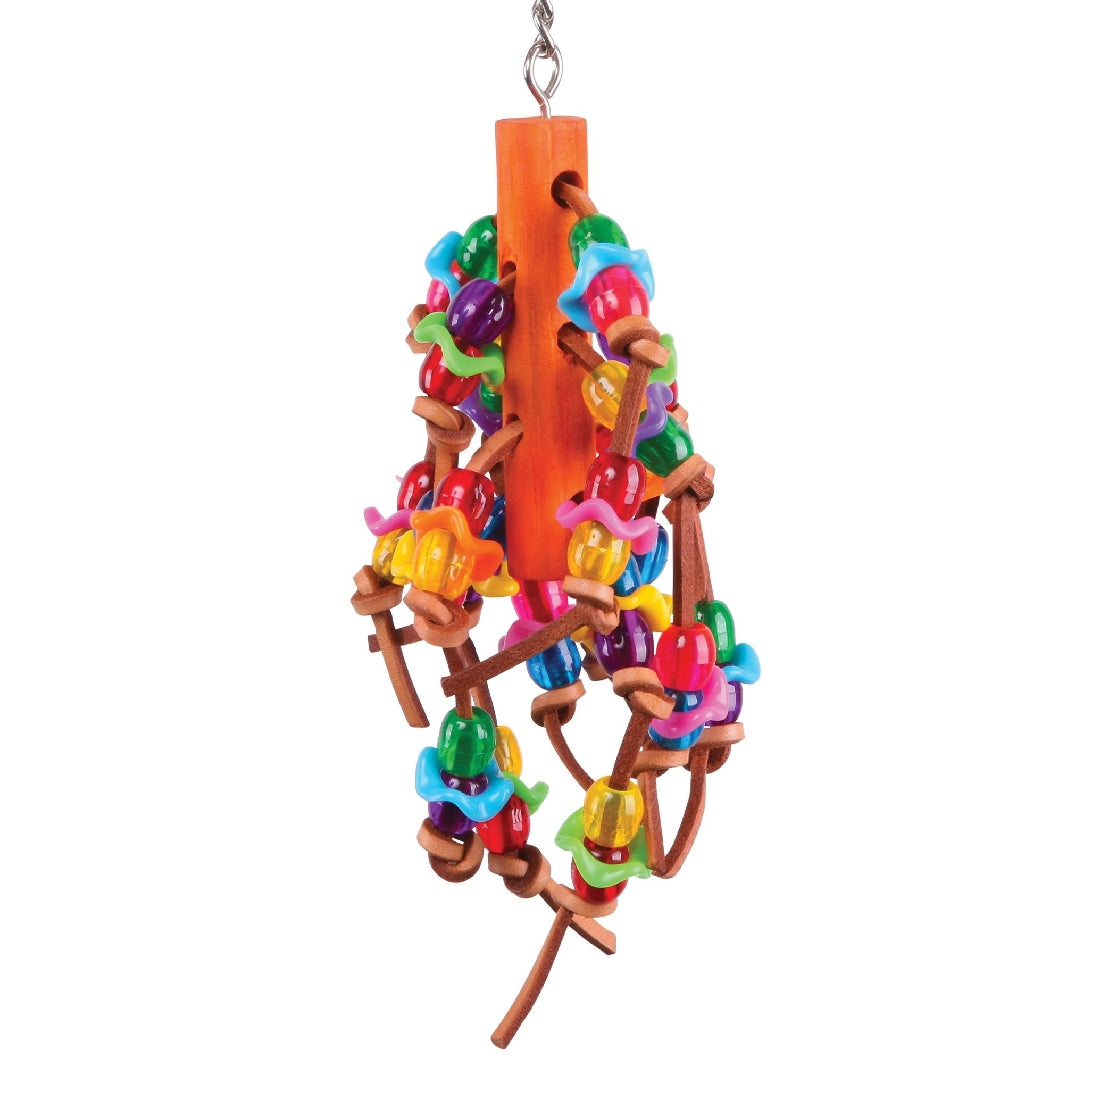 Colorful hanging bird toy with beads and wooden blocks.